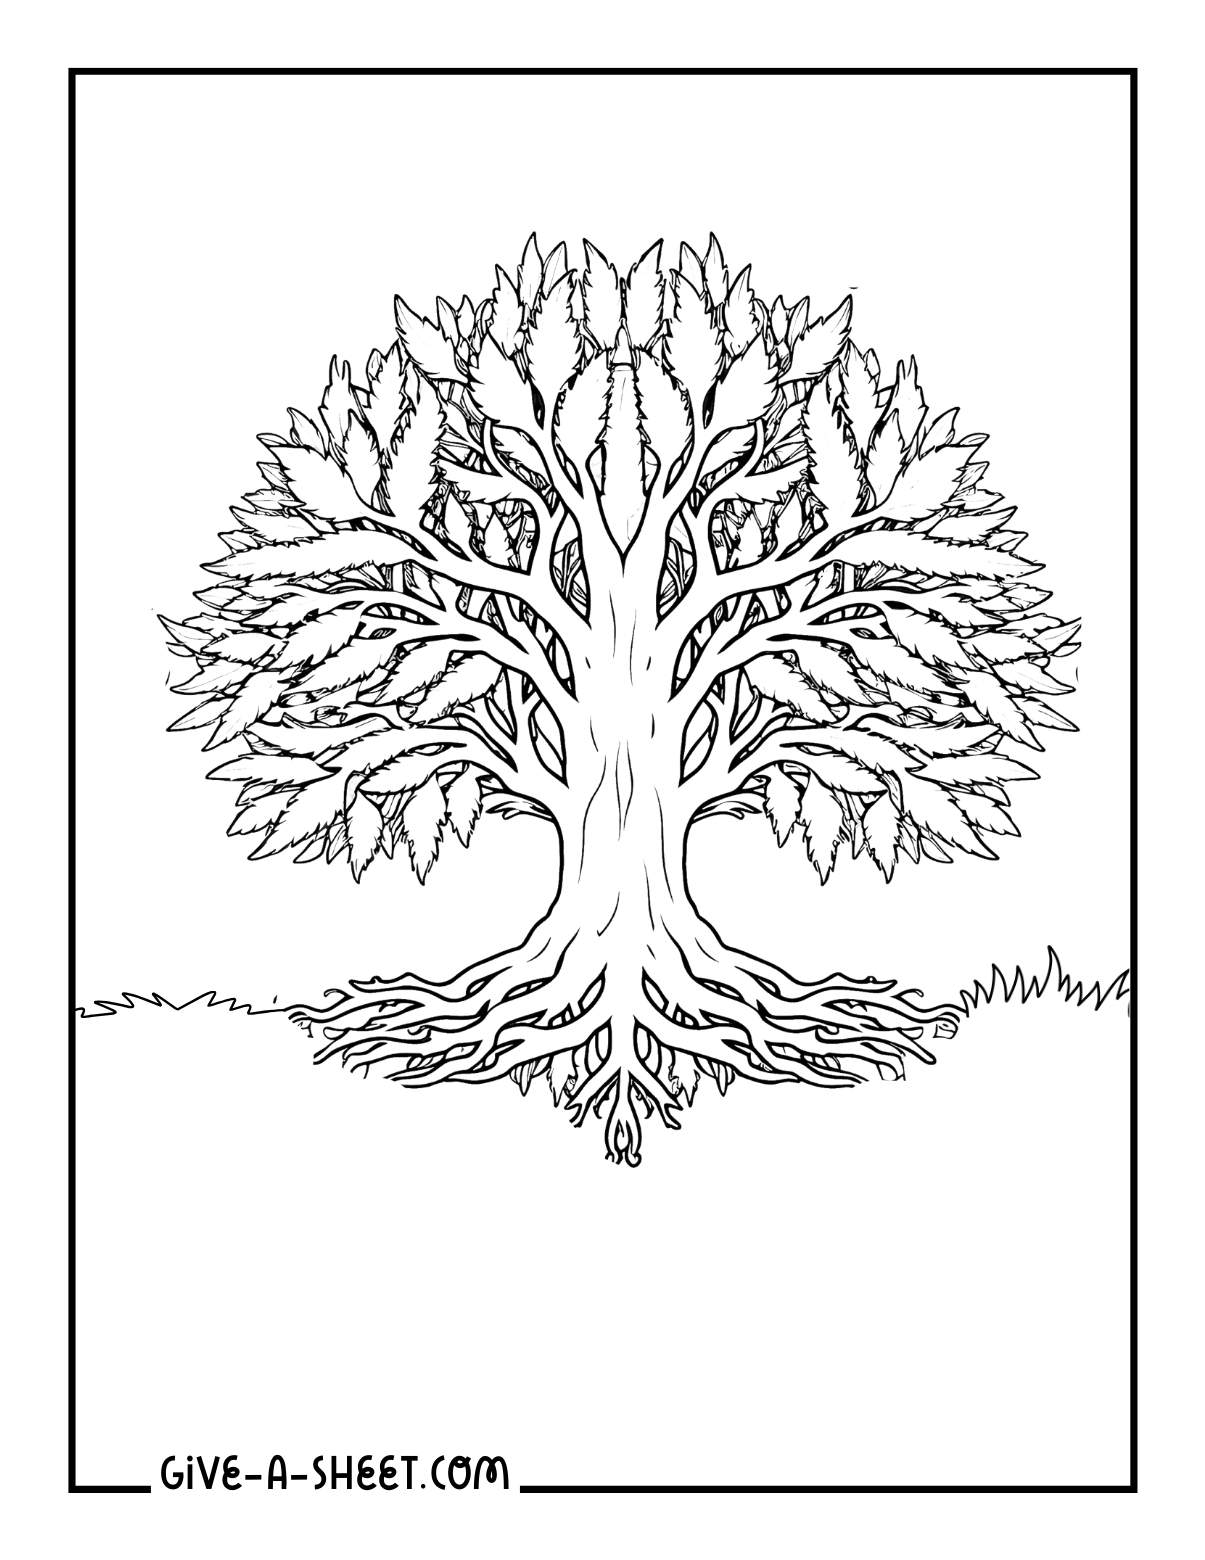 Evergreen trees of life with roots coloring sheet.